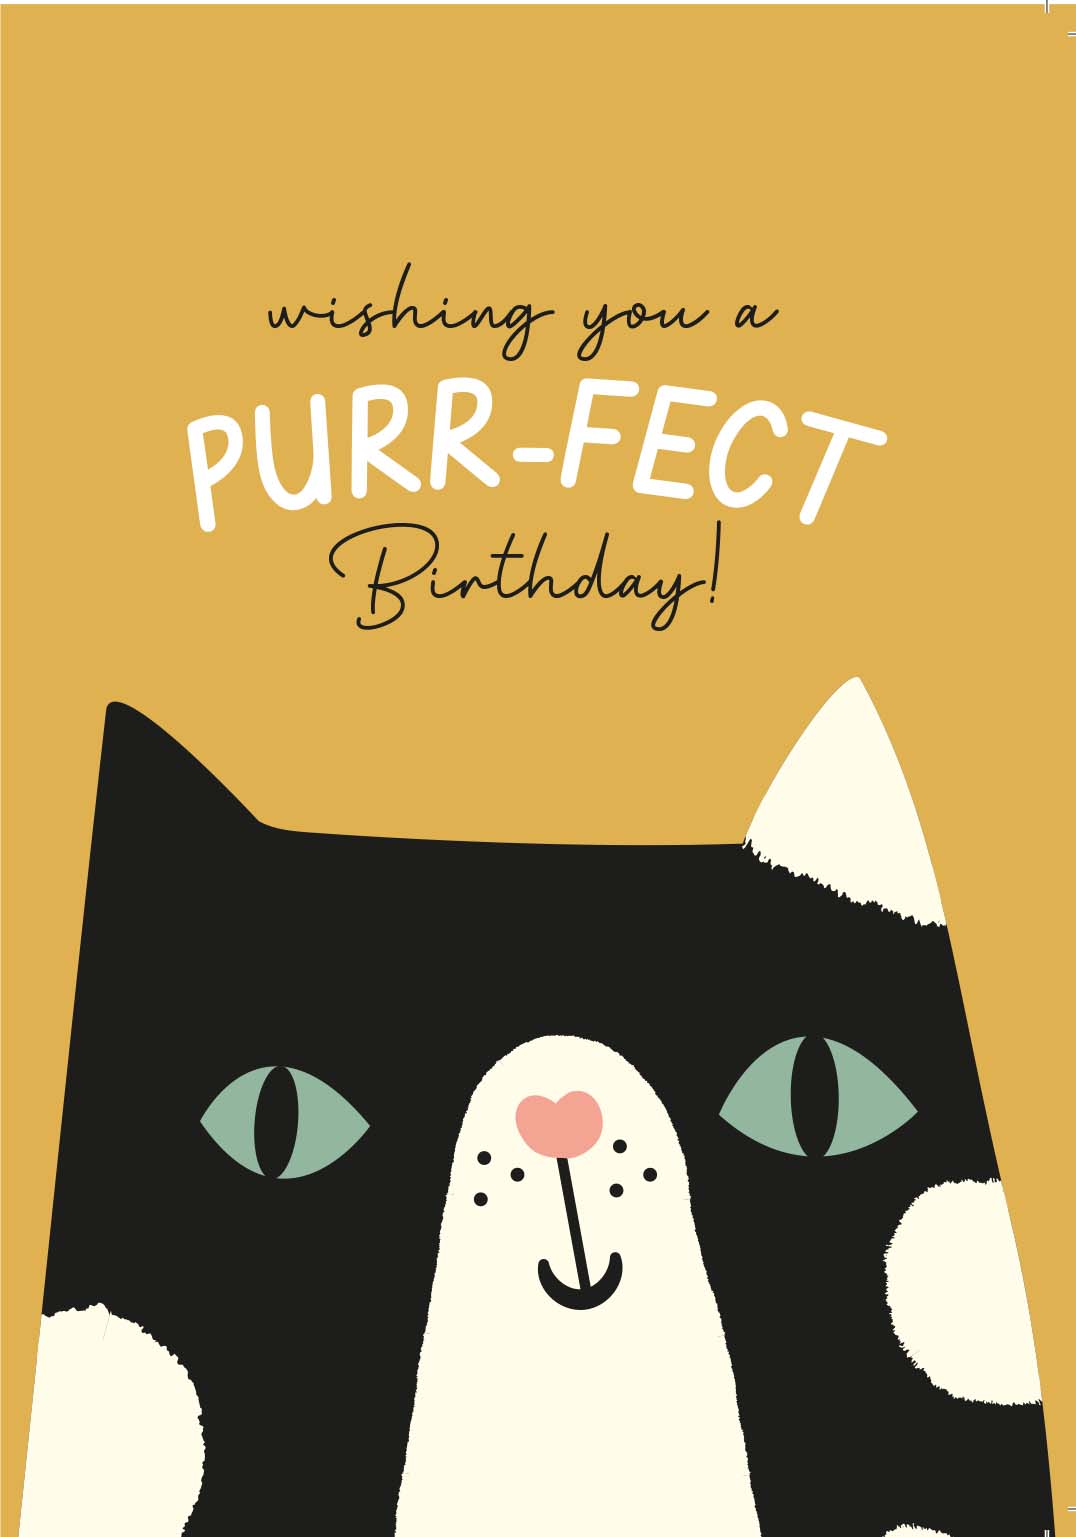 Illustration of a black and white cat with mint green eyes and a heart shaped pink nose on a mustard yellow solid background. Above the cat is text stating: wishing you a purr-fect birthday!